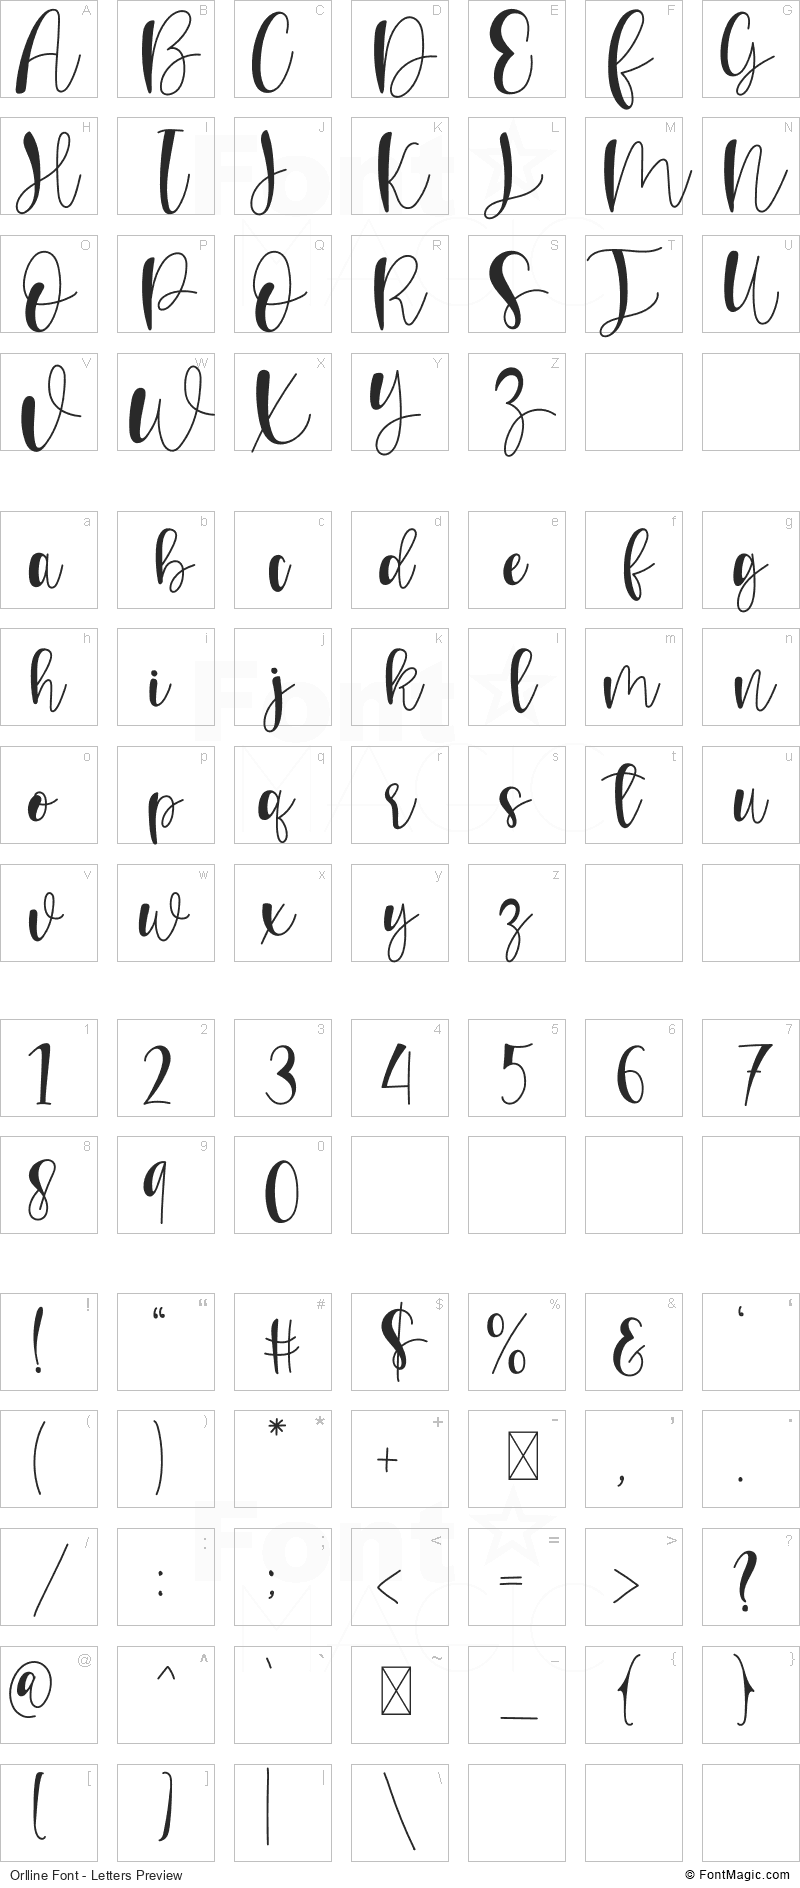 Orlline Font - All Latters Preview Chart